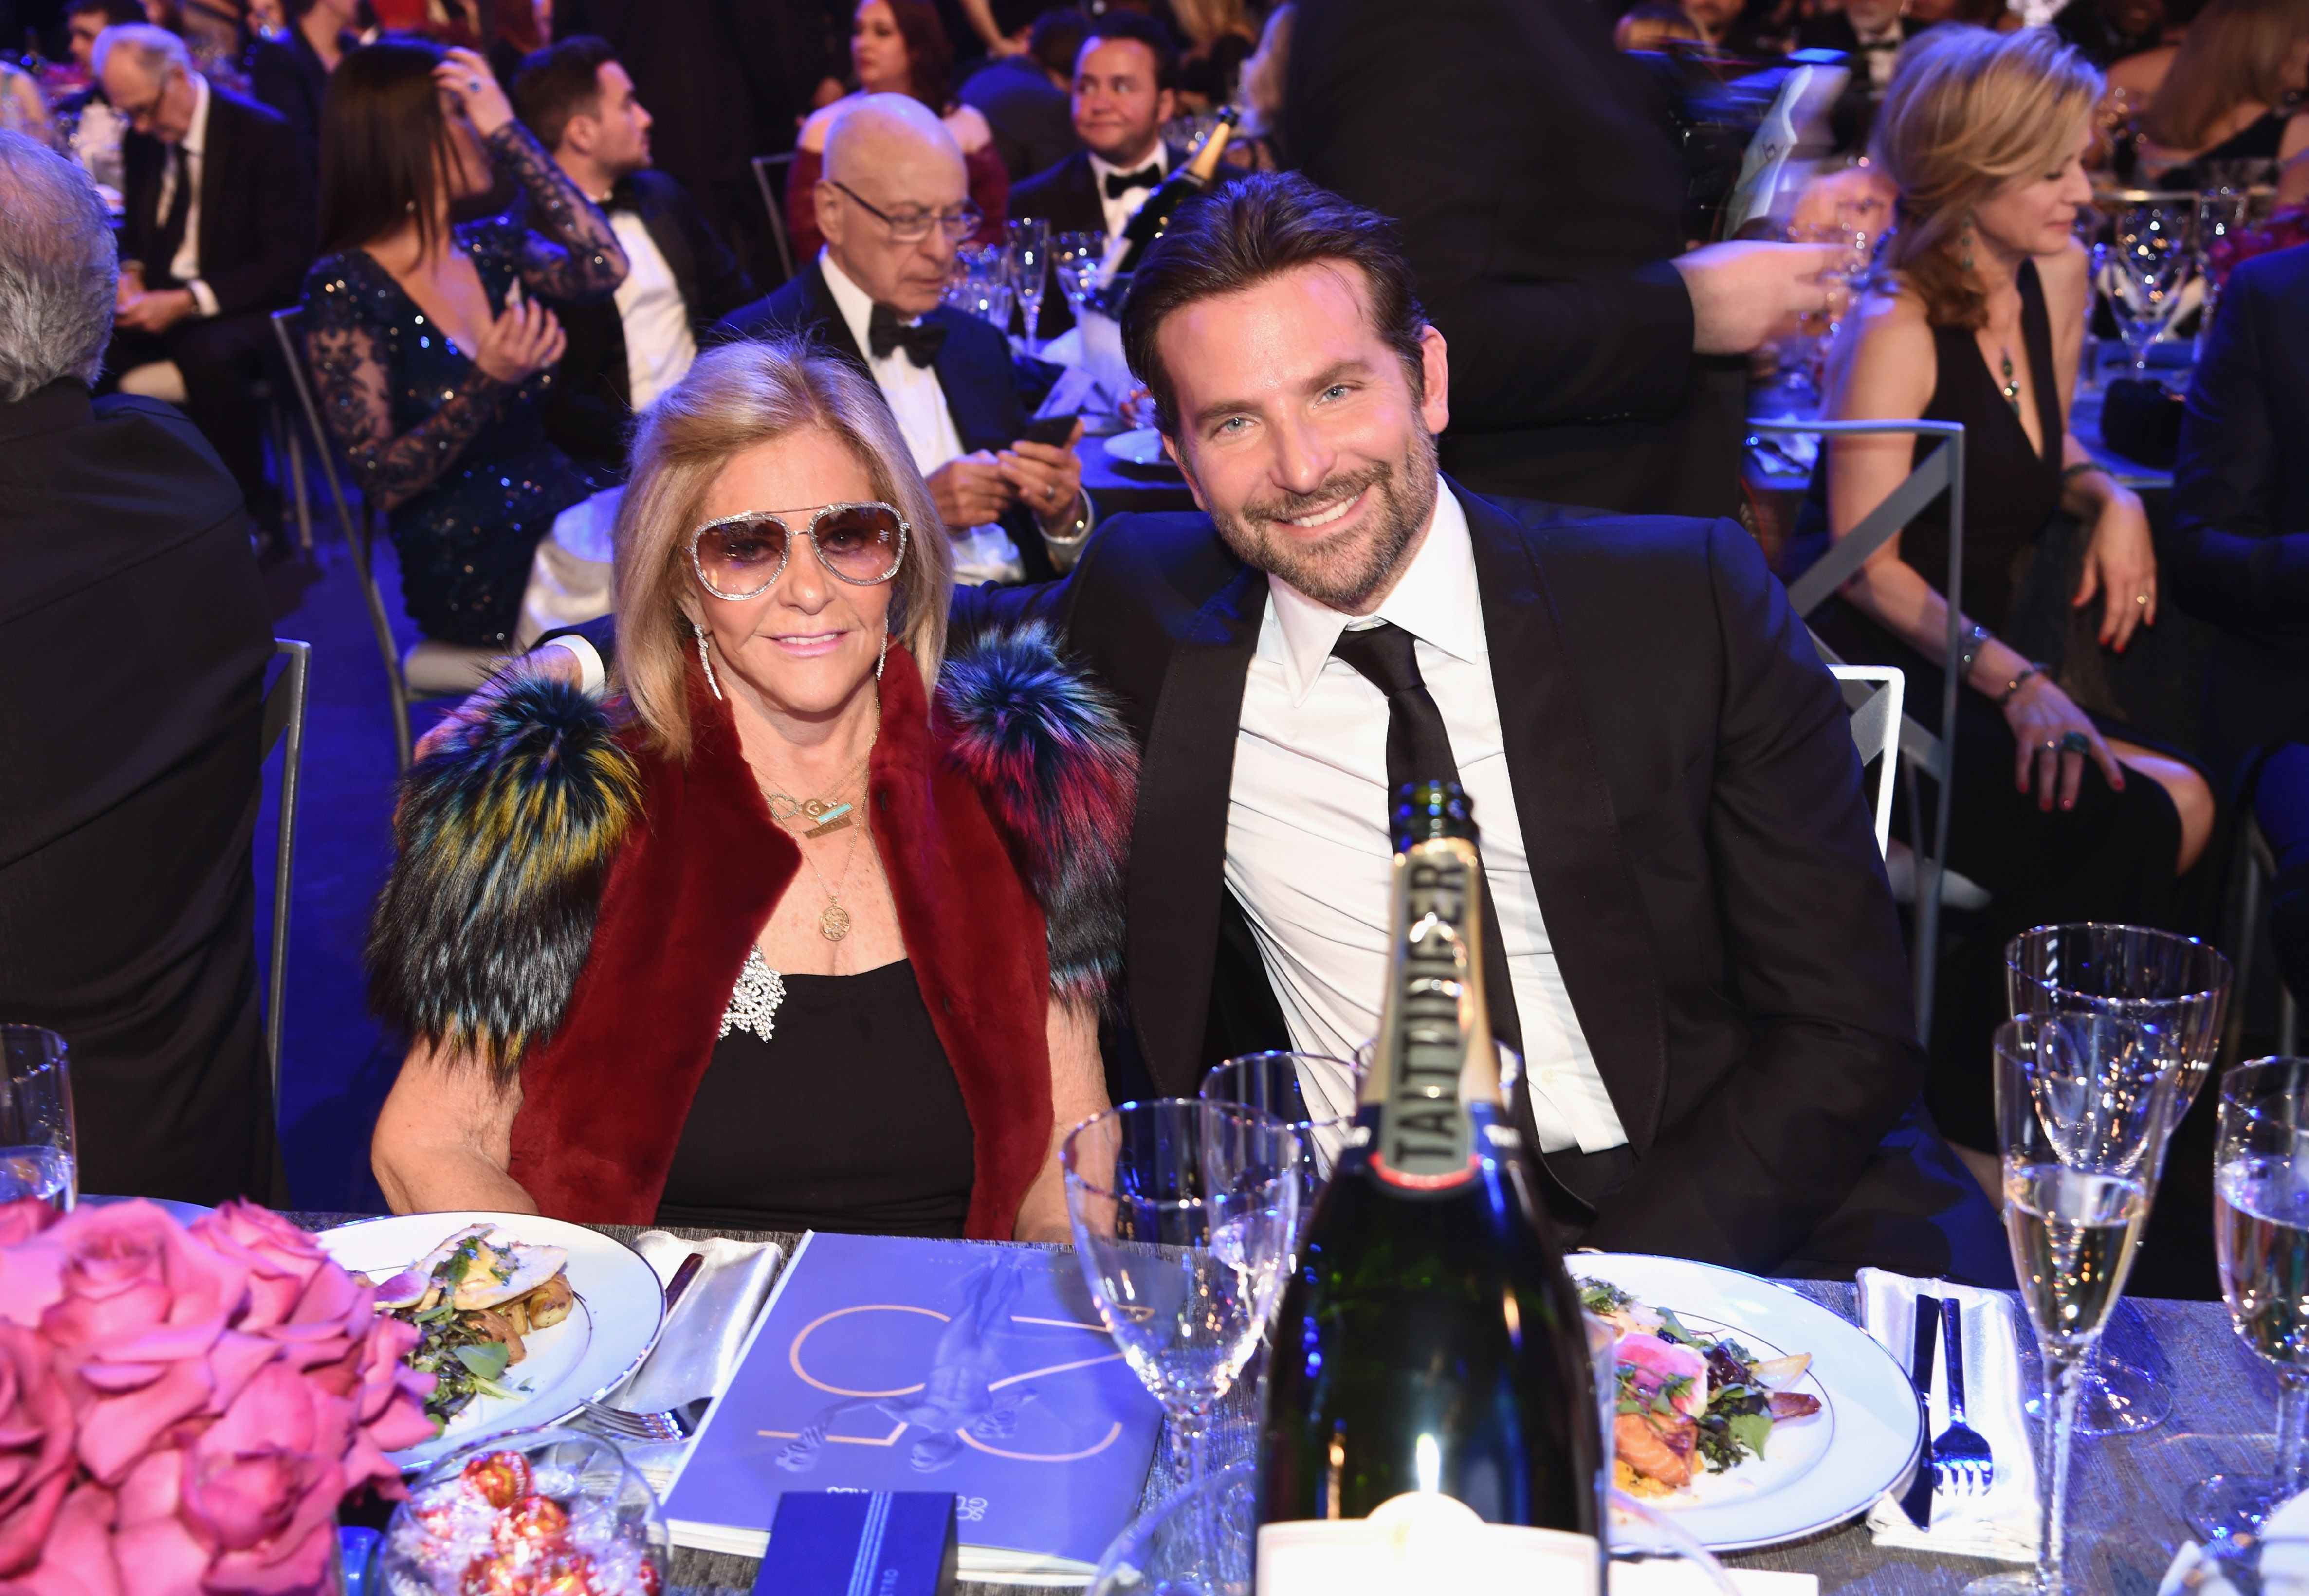 Gloria Campano and Bradley Cooper attend the 25th Annual Screen Actors Guild Awards at The Shrine Auditorium on January 27, 2019, in Los Angeles, California. | Source: Getty Images